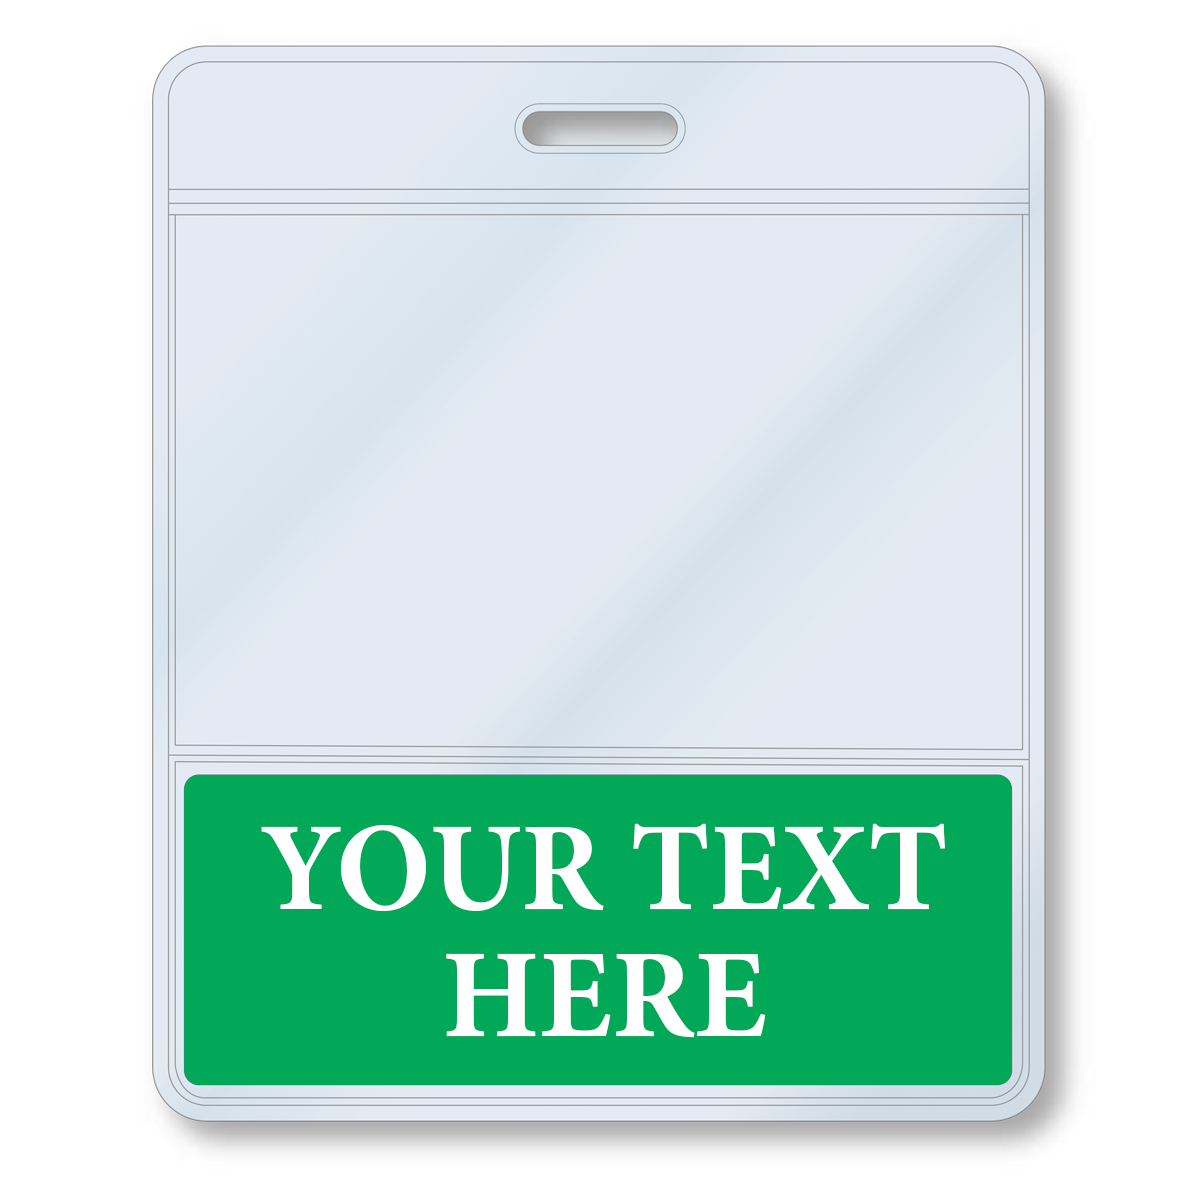 A Custom Printed BadgeBottoms® Horizontal (Badge Holder & Badge Buddy IN ONE) with a green section at the bottom that reads "YOUR TEXT HERE" in white capital letters, perfect for a customizable title.